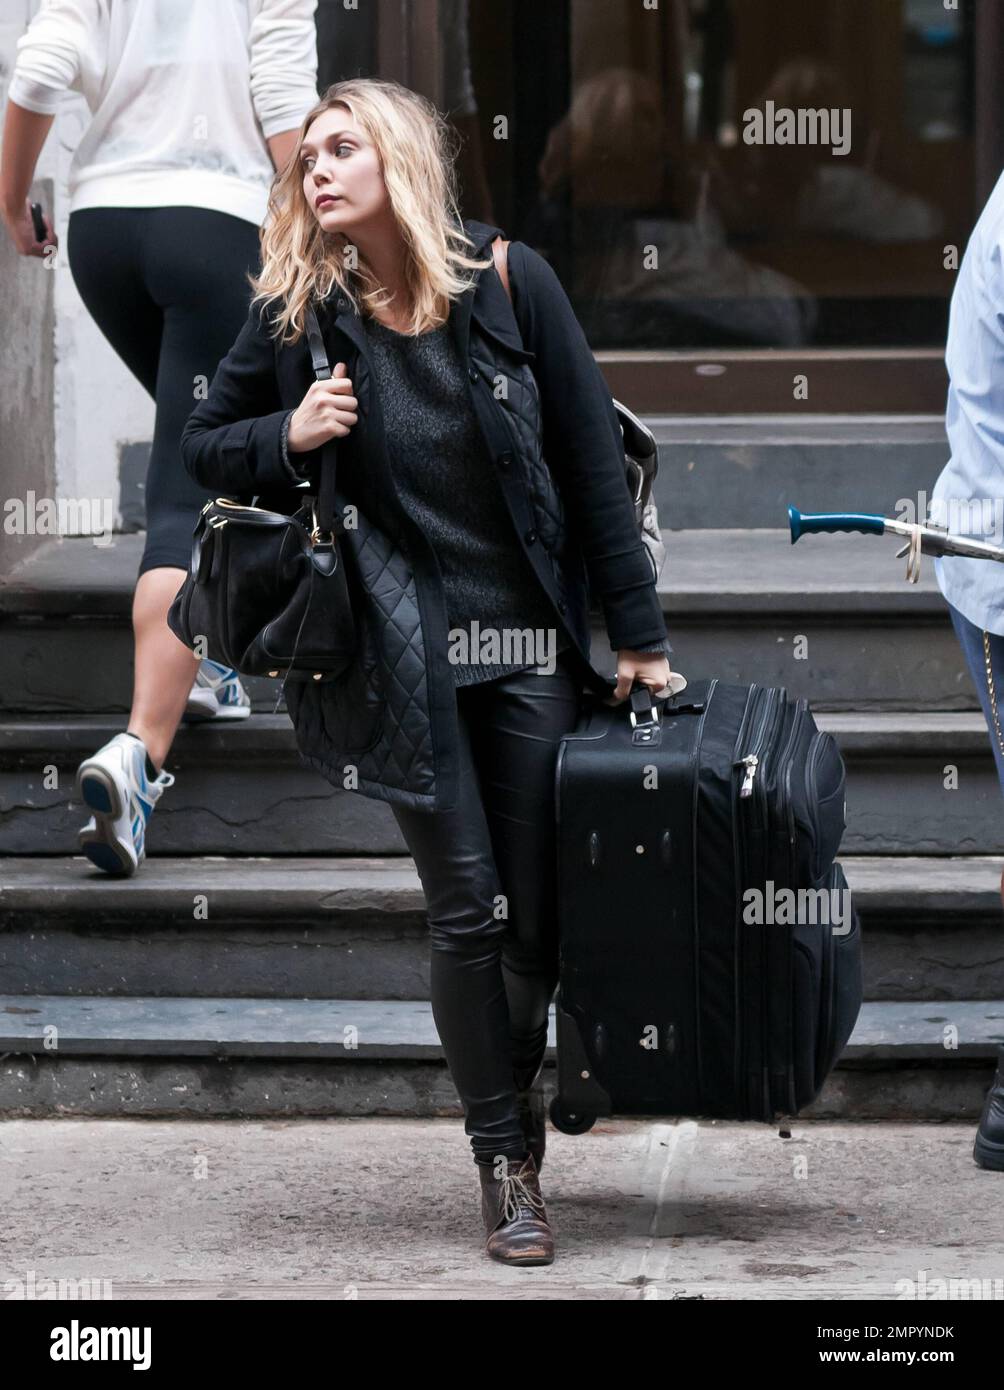 Actress Elizabeth Olsen, younger sister to famous twins Mary-Kate Olsen and Ashley Olsen, was seen departing her West Village apartment with luggage in hand as she made her way to the airport to catch a flight to Los Angeles. It's been reported that Elizabeth has become an overnight starlet with her lead debut in 'Martha Marcy May Marlene' which premiered earlier this week at the New York Film Festival. The film has a limited release date of October 21st and is already generating Oscar buzz. New York, NY. 13th October 2011. Stock Photo